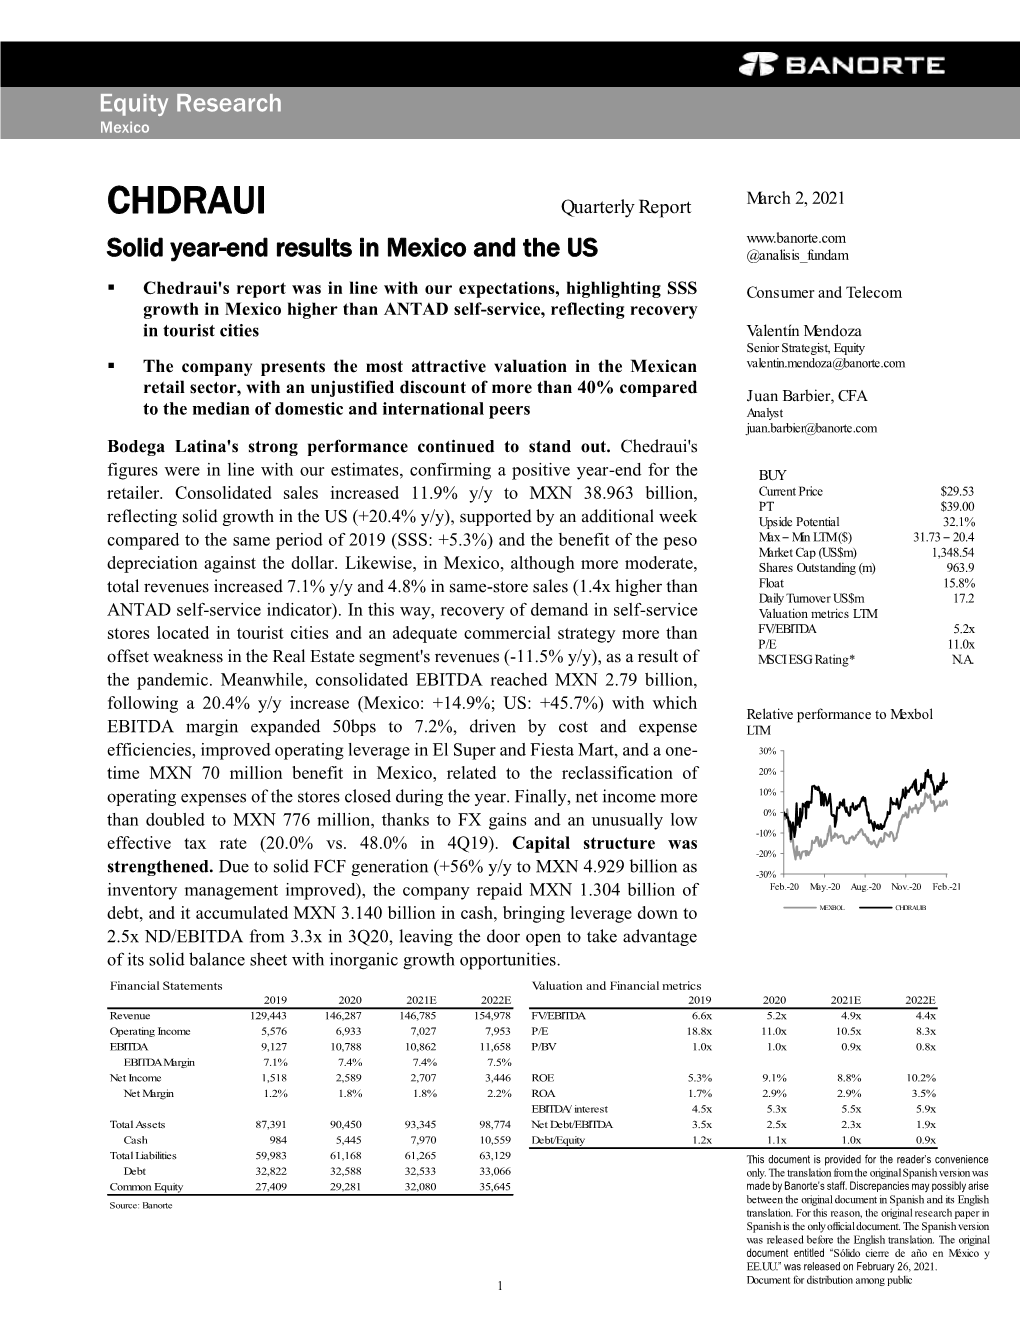 CHDRAUI Solid Year-End Results in Mexico and the US @Analisis Fundam